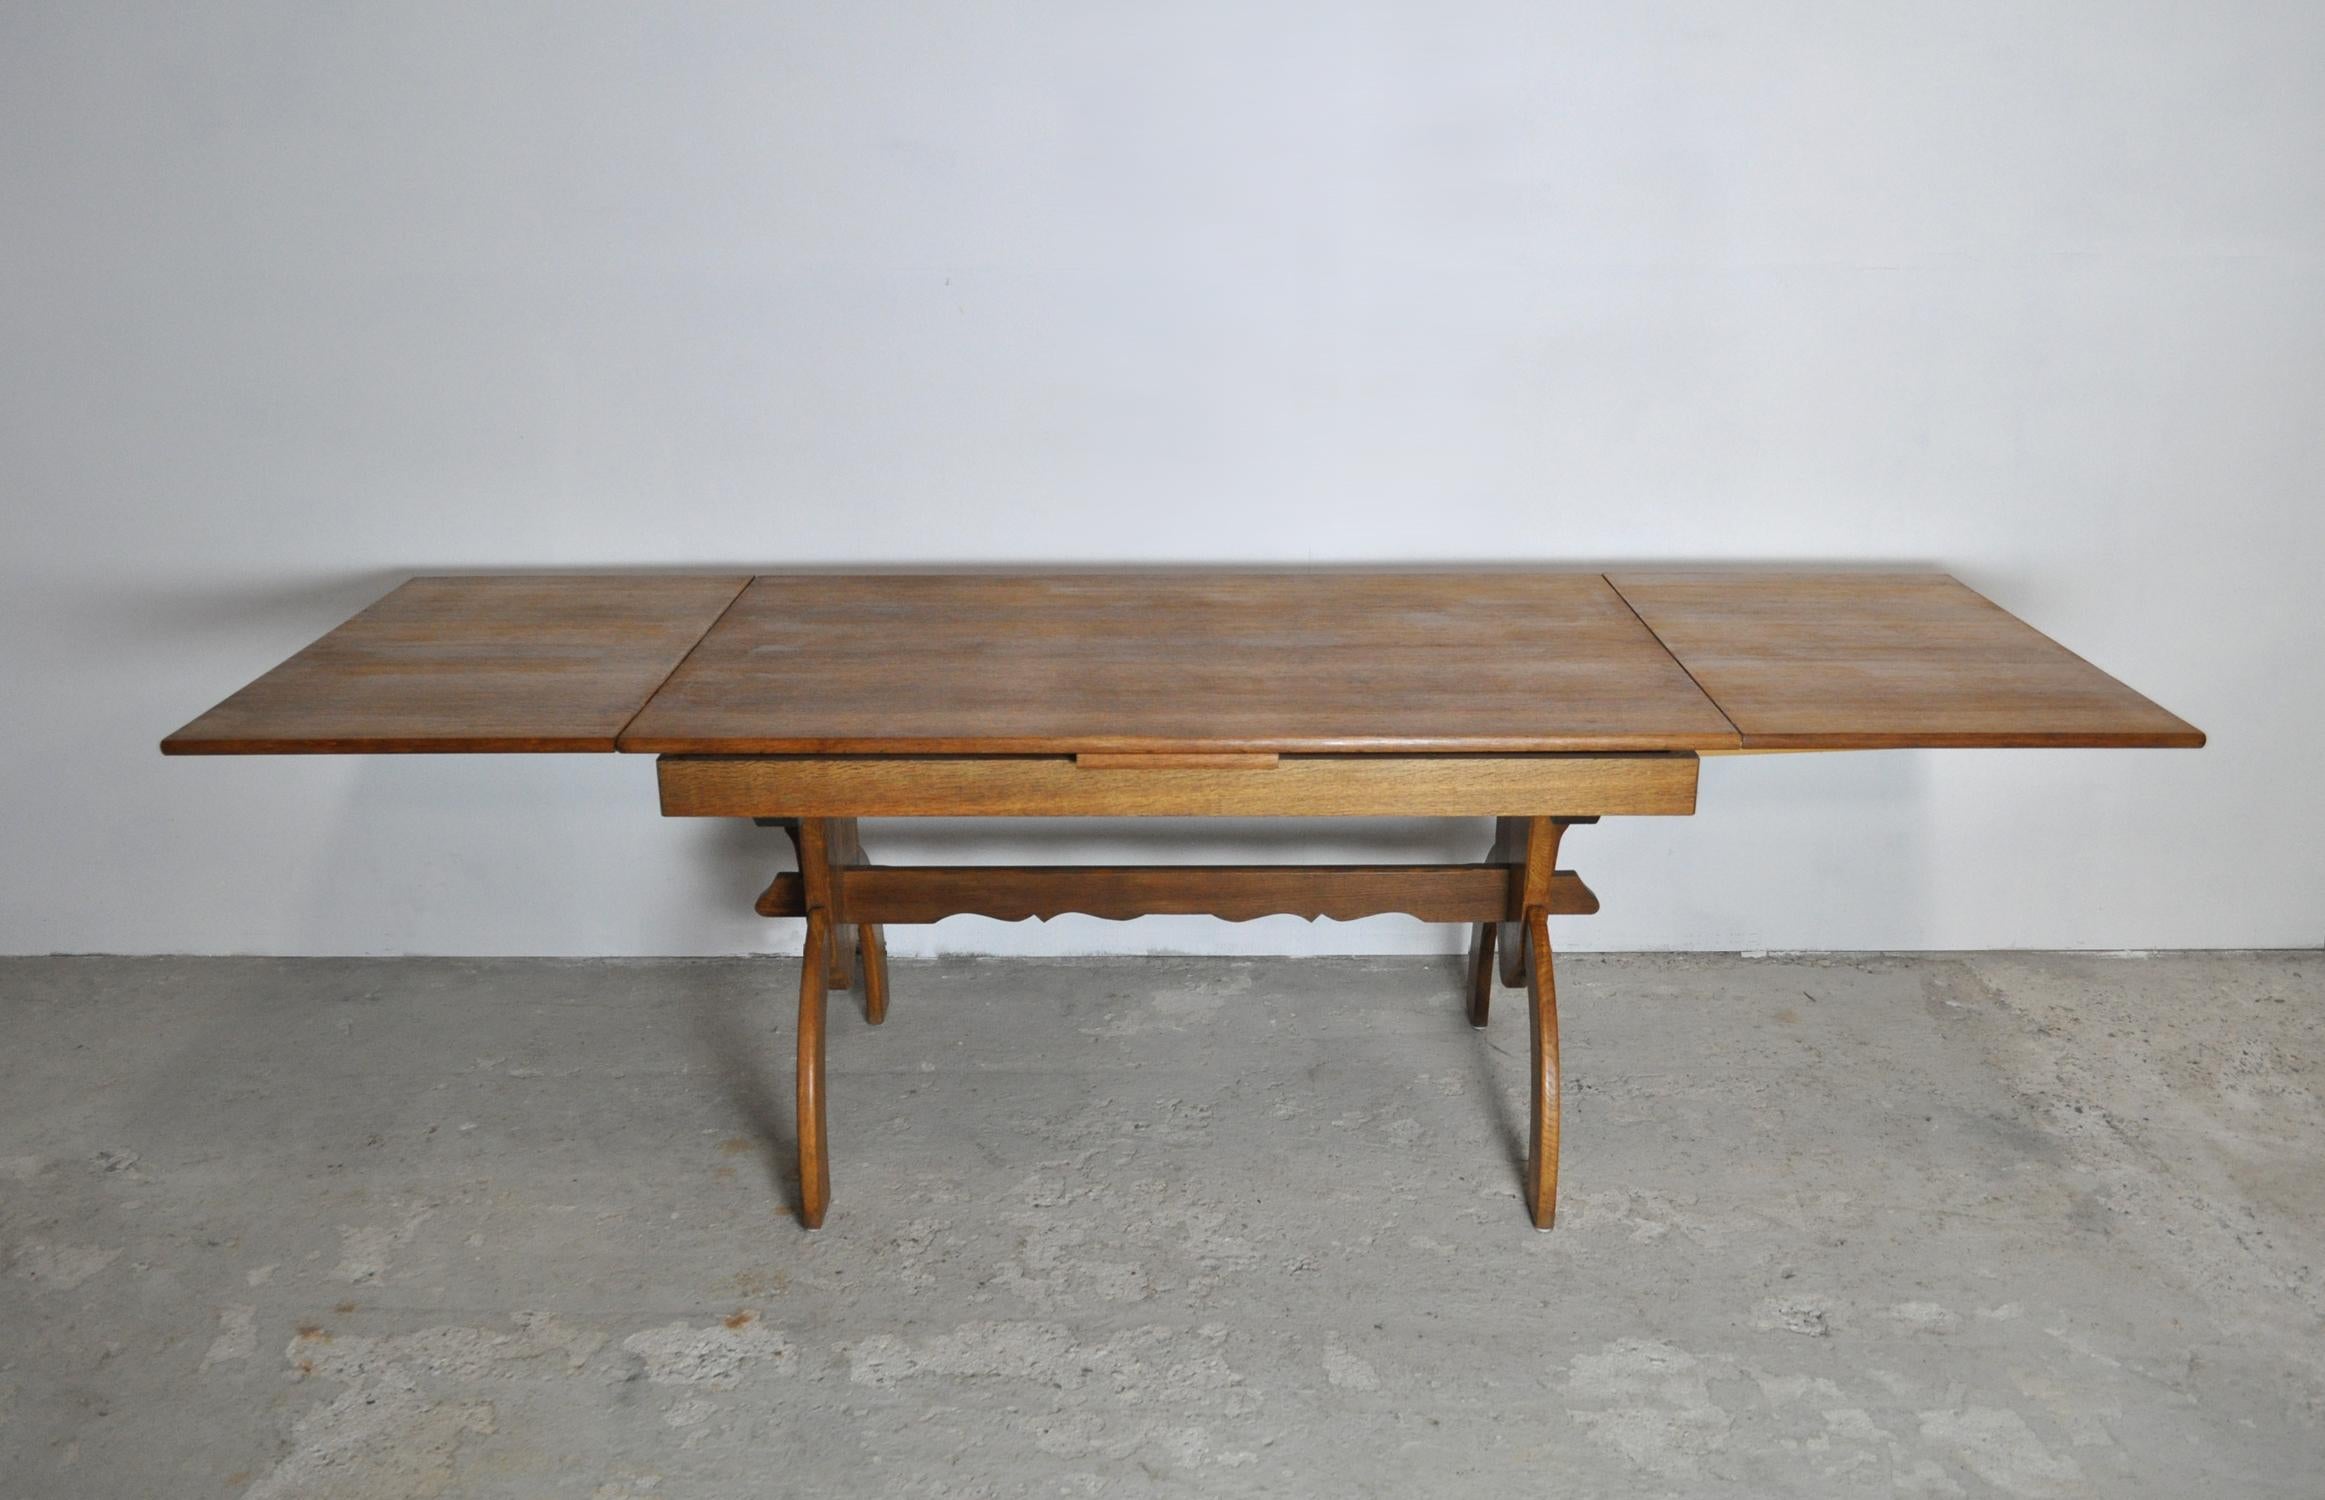 Dining table designed by Henning Kjærnulf for EG Kvalitetsmøbel, made of solid and veneer oak. Gorgeous grain and two expandable leaves.

A design where rustic meets modernism design. Gently refurbished solid oak with a beautiful grain. 4 dining